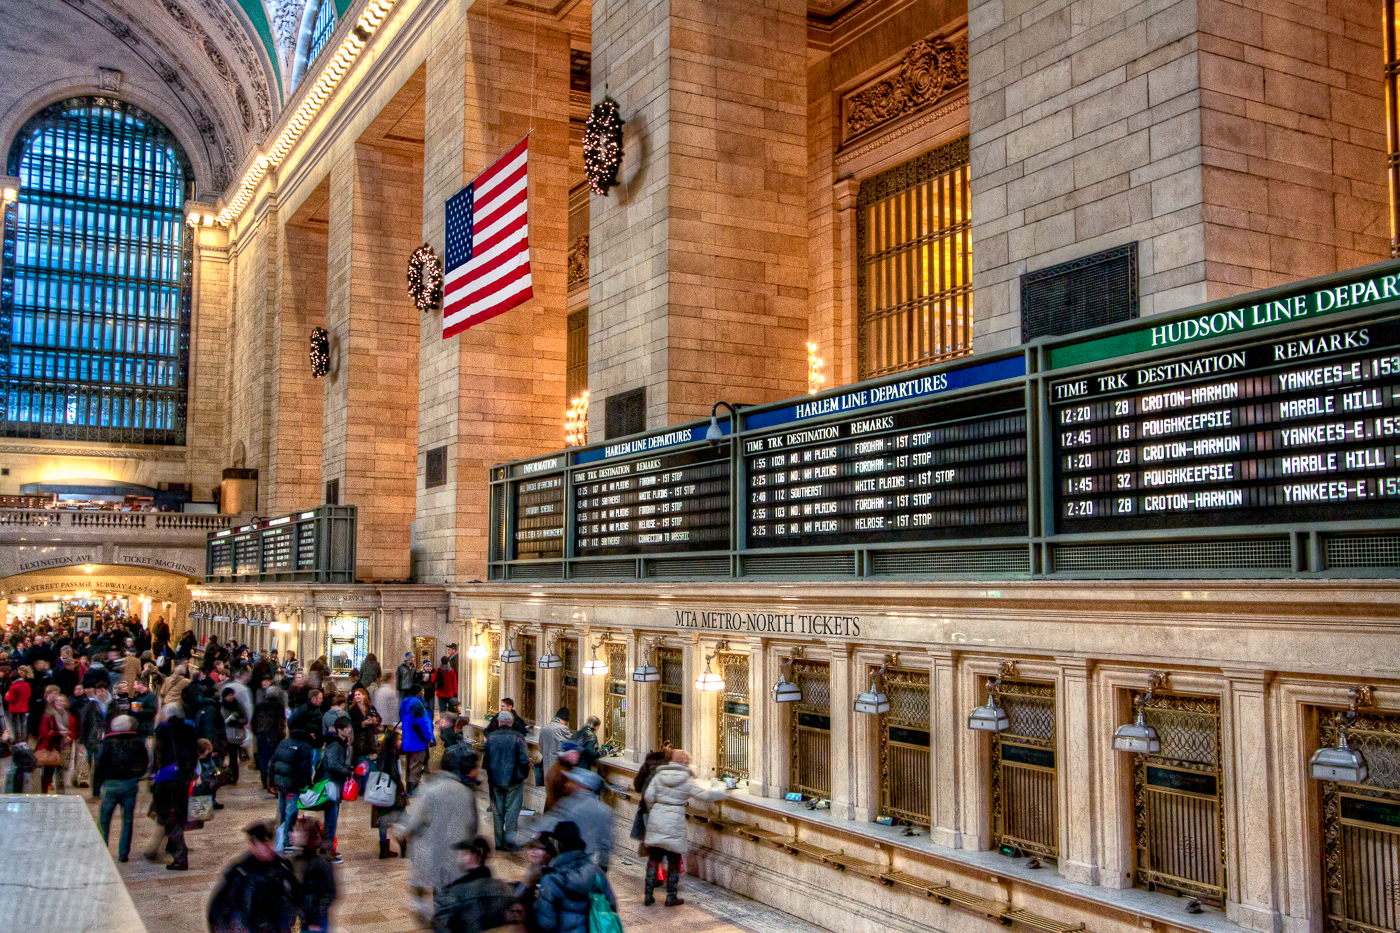 grand central terminal image 